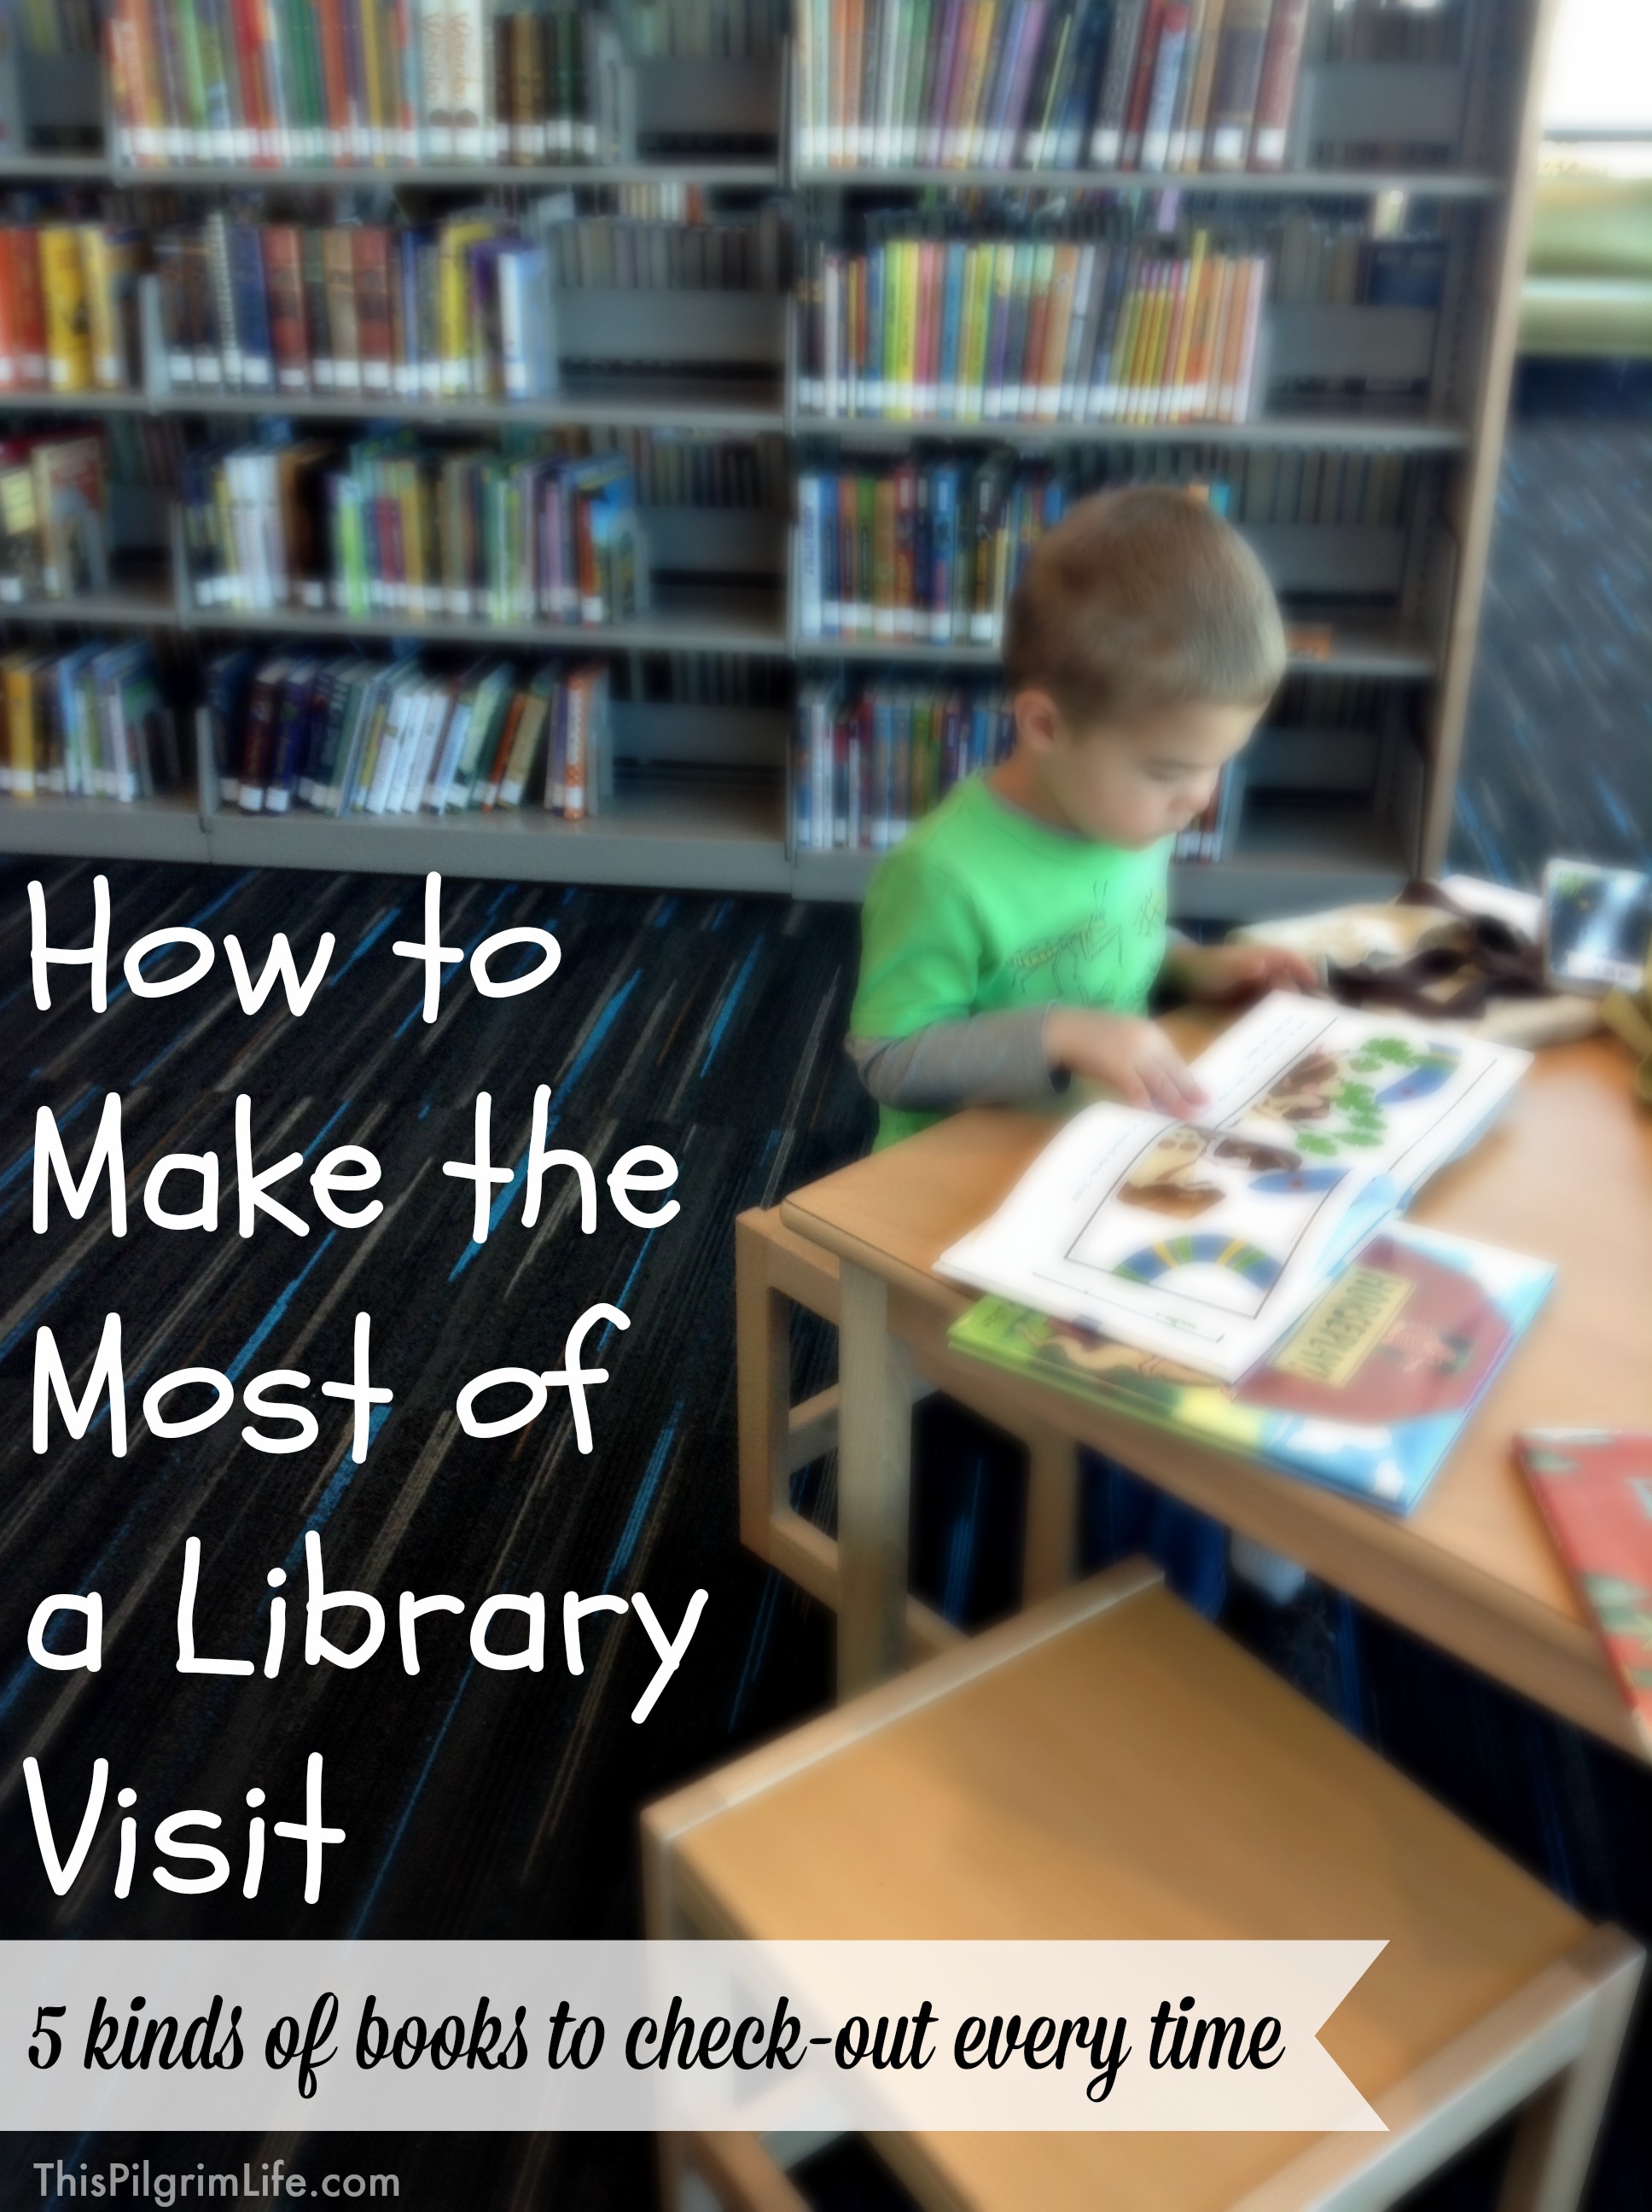 How to Make the Most of a Library Visit